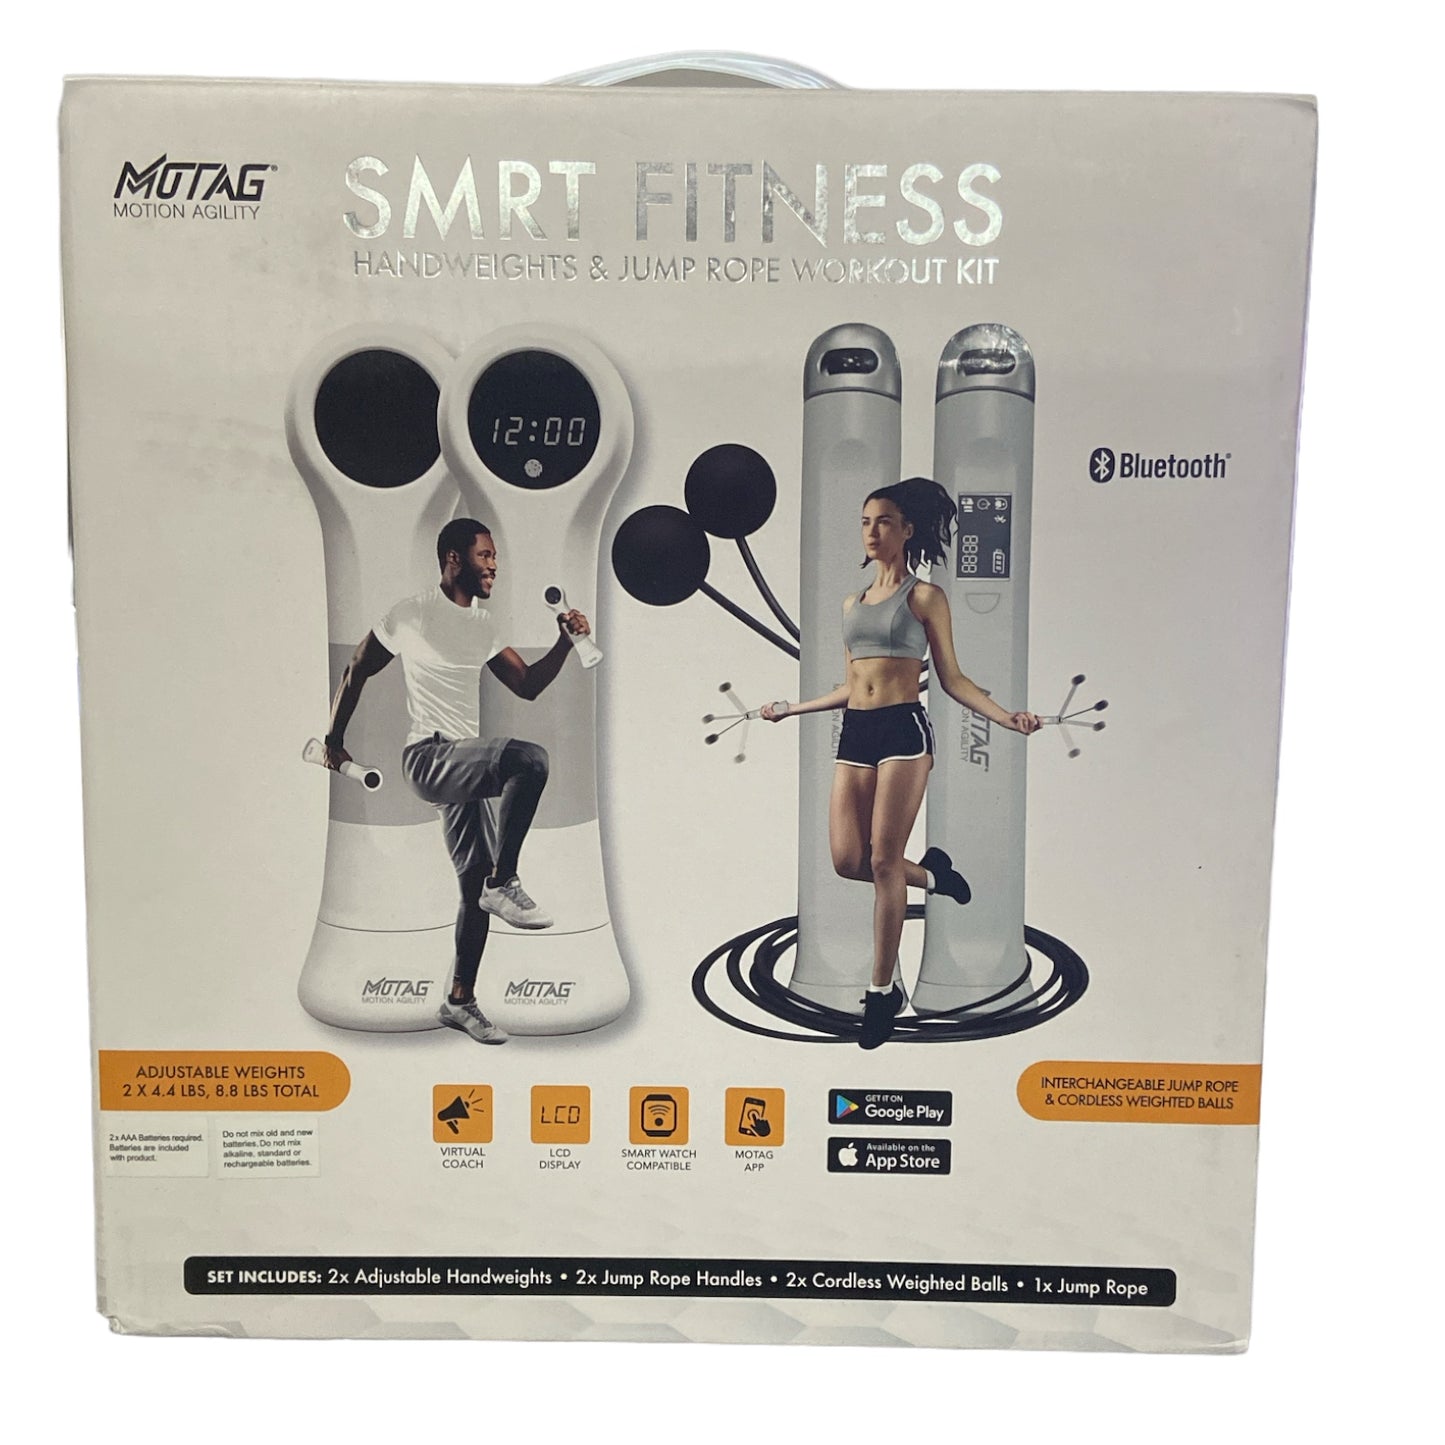 Motag Smrt Fitness Handweights and Jump Rope Workout Kit